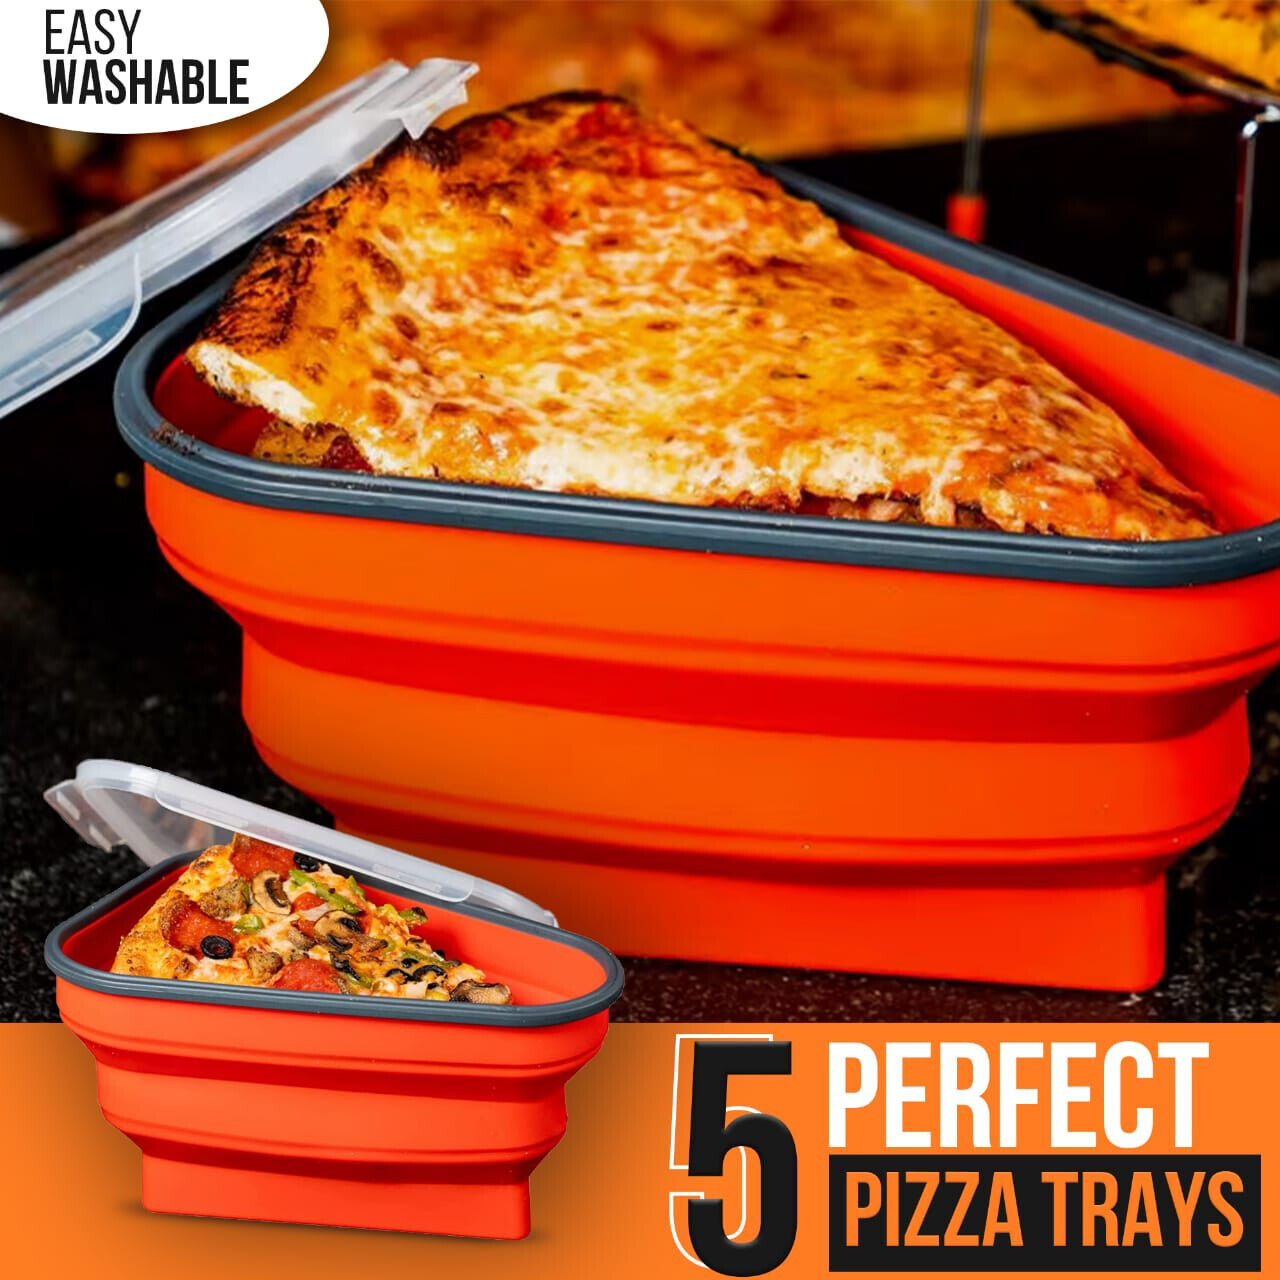 Ultimate Pizza Pack Storage Container Reusable Foldable Portable Microwavable